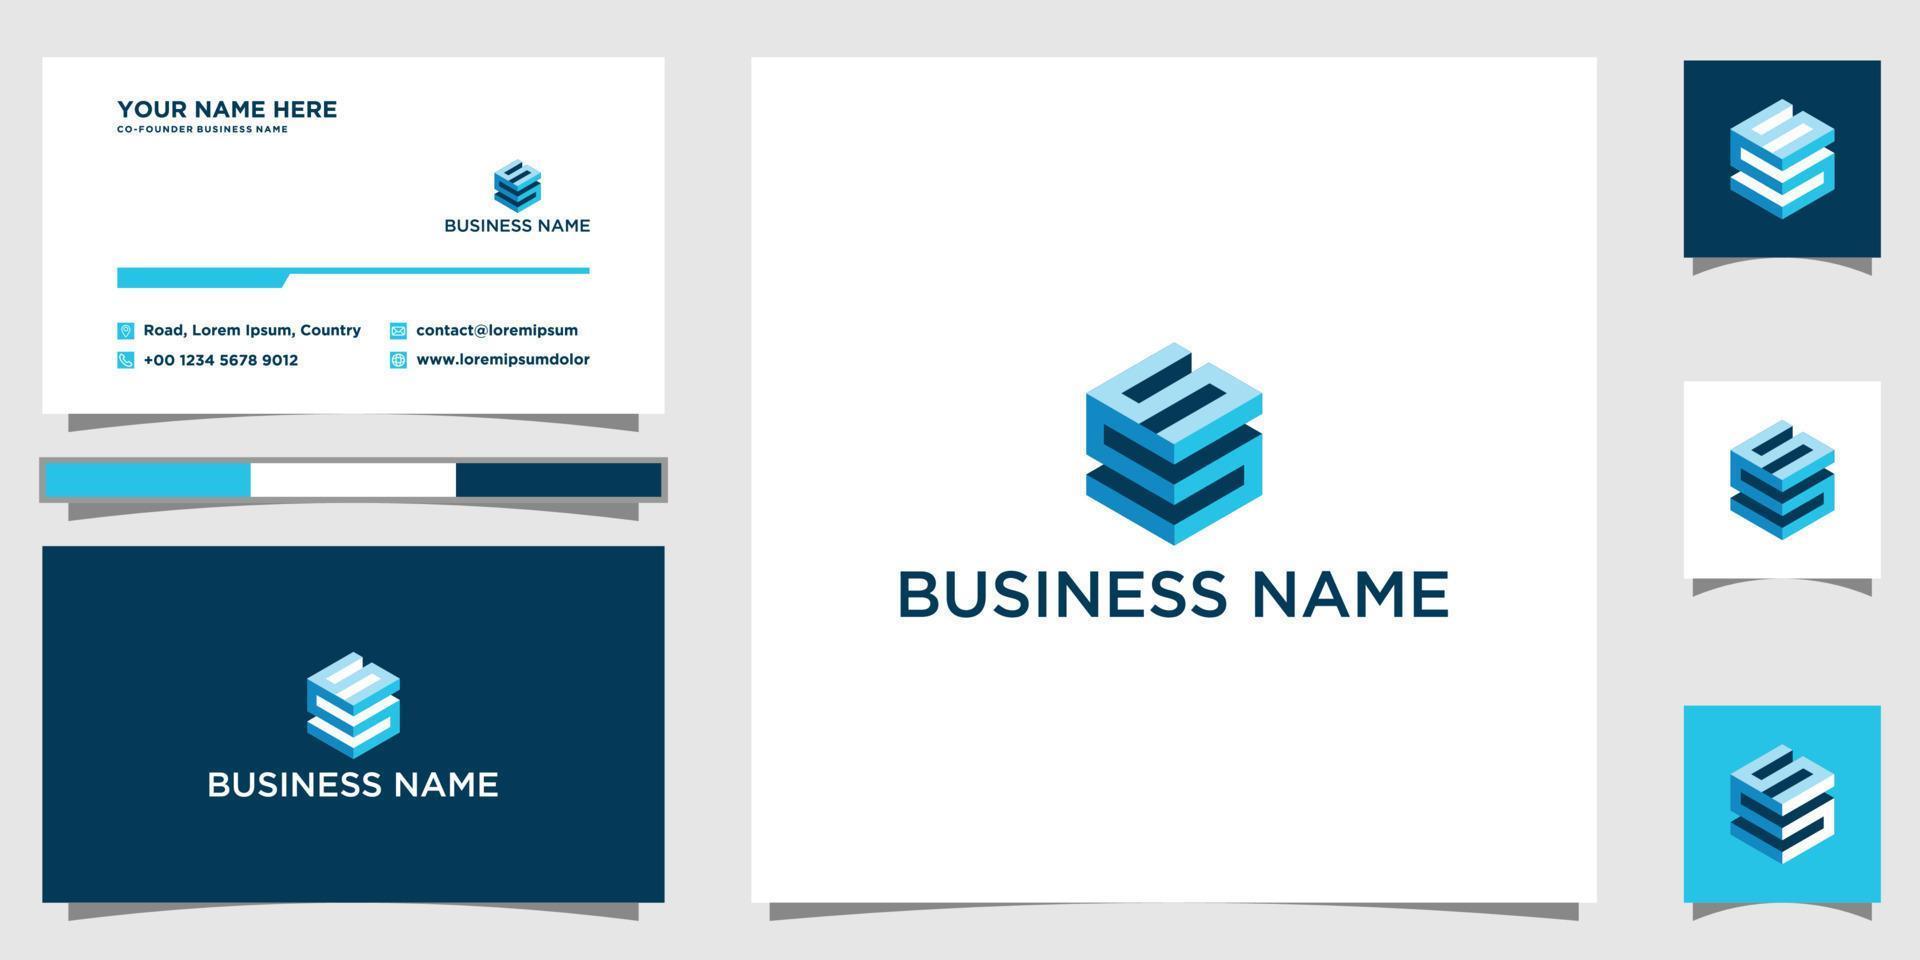 etter S SS 3d Design elements with business card templete vector